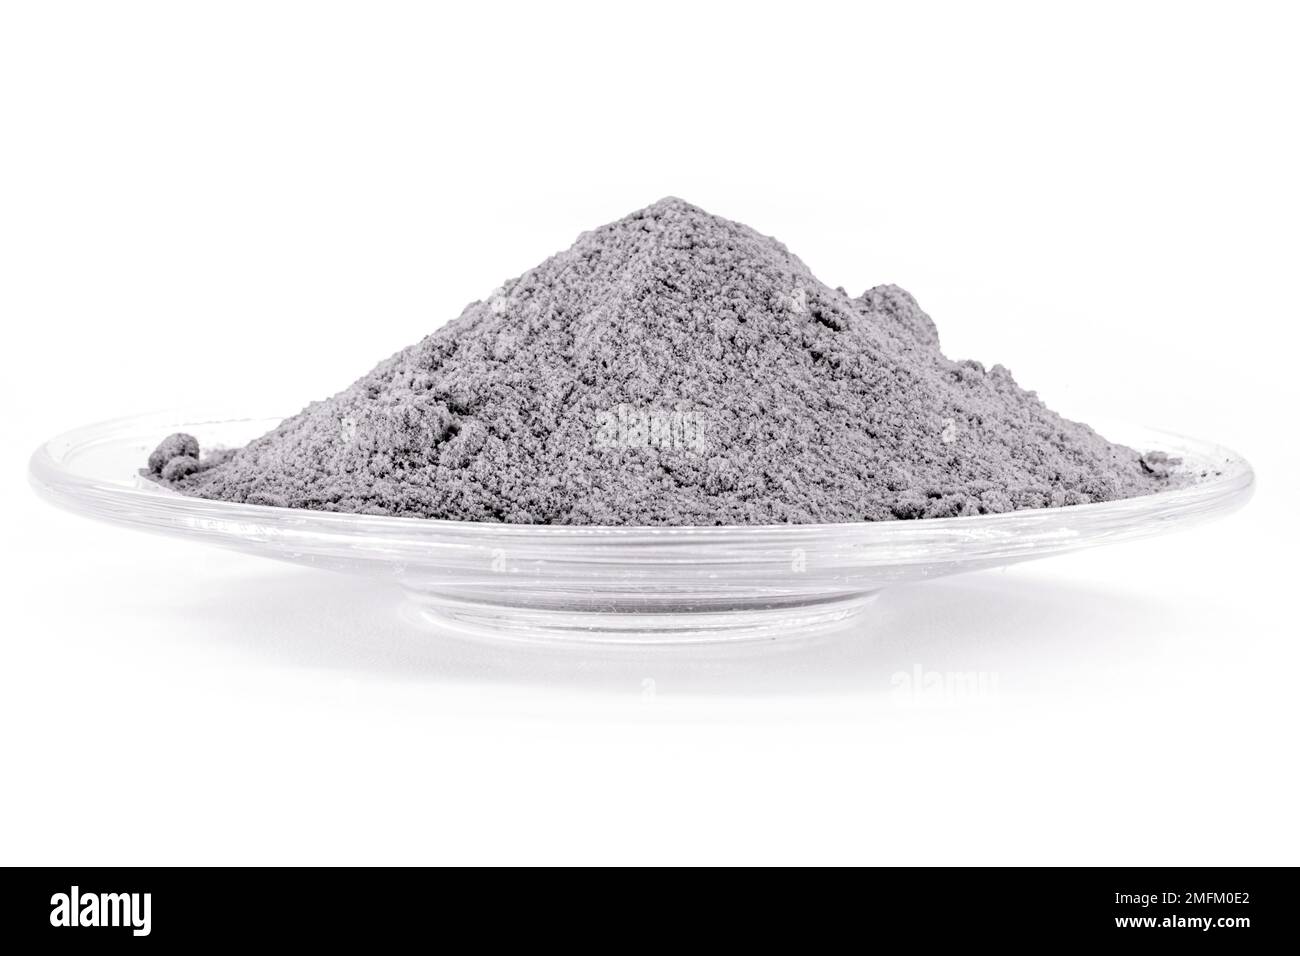 aluminum oxide or alumina, chemical compound of aluminum and oxygen, used in blasting to remove excess calcined coating and in parts made of metal. Stock Photo